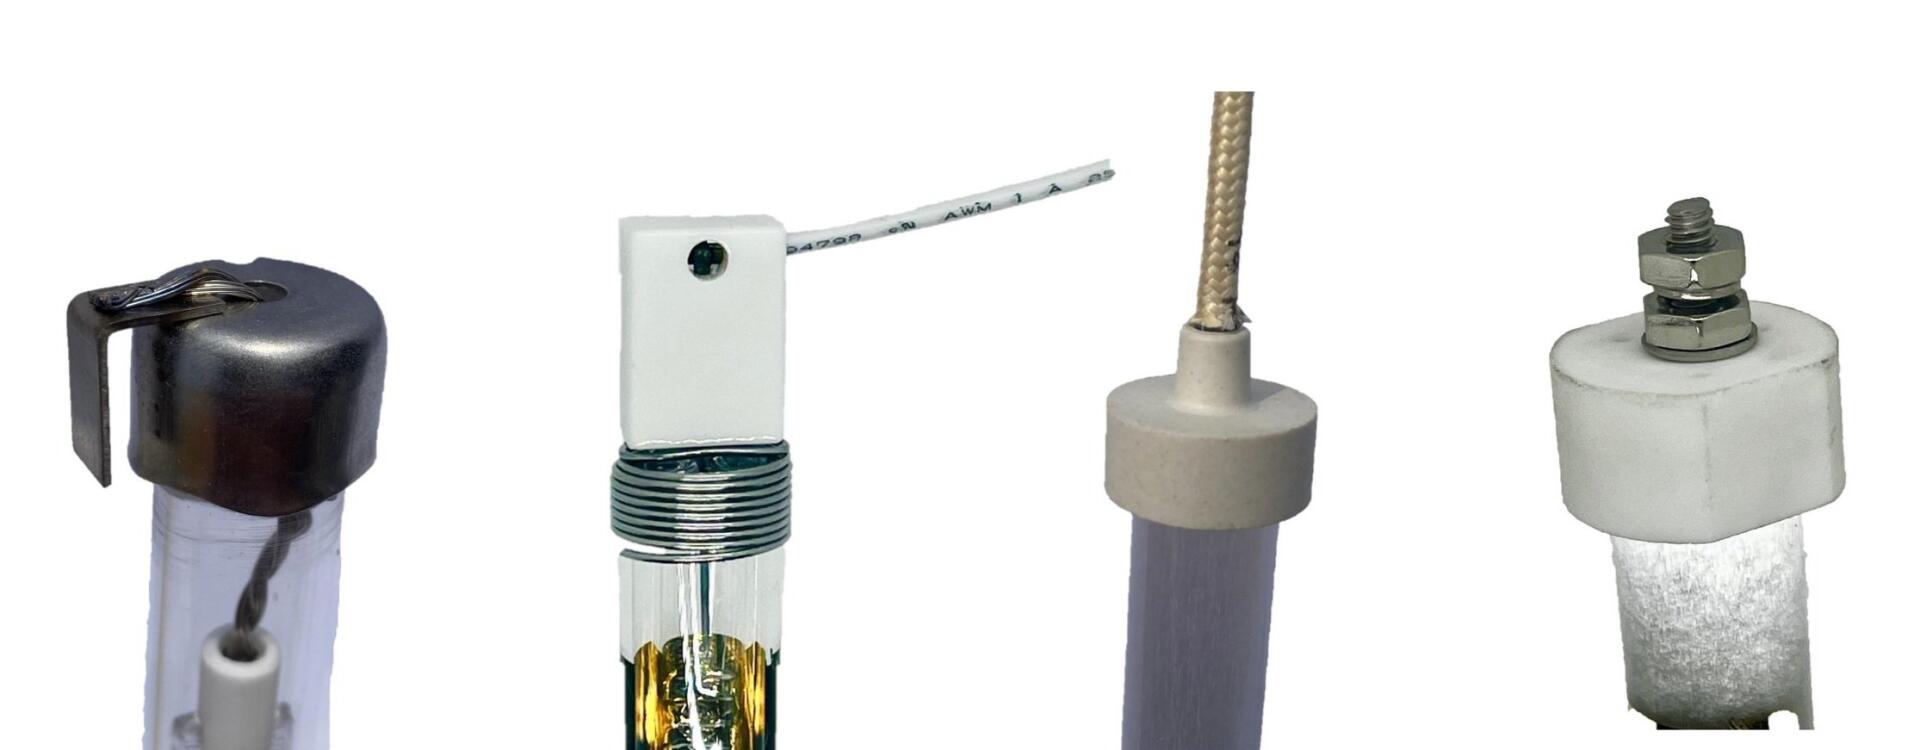 Different types of end caps and connectors for Fannon Product's custom replacement infrared lamps